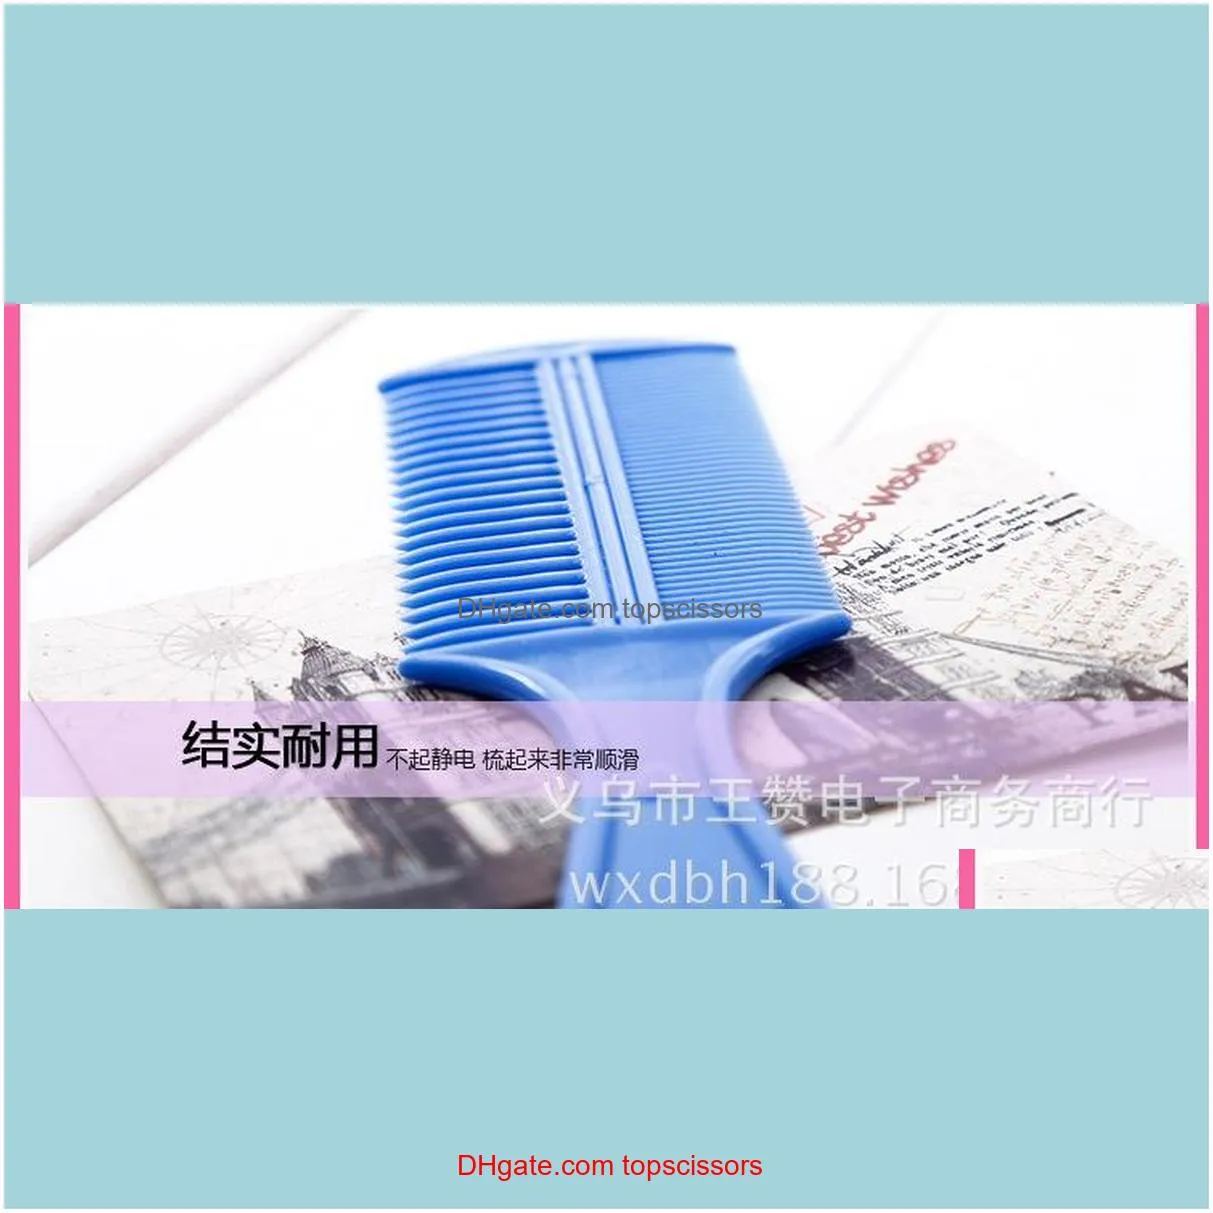 Home plastic hair comb thickness of both sides of the US makeup makeup comb